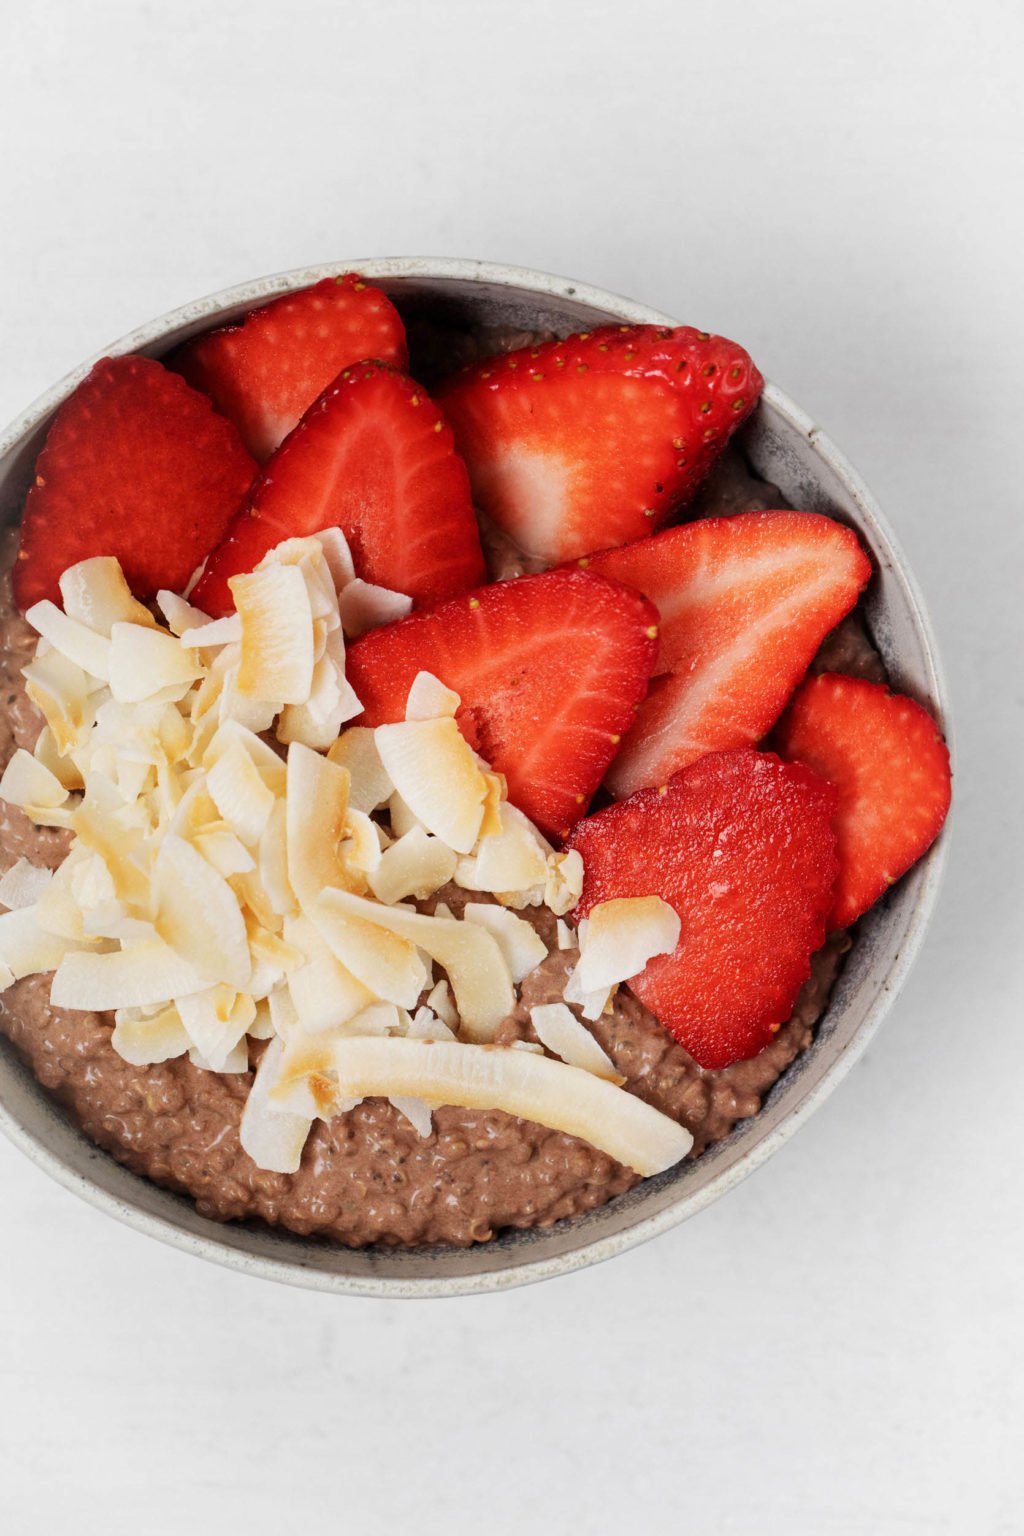 A close up, overhead image of a whole grain breakfast with coconut shreds and fresh fruit.